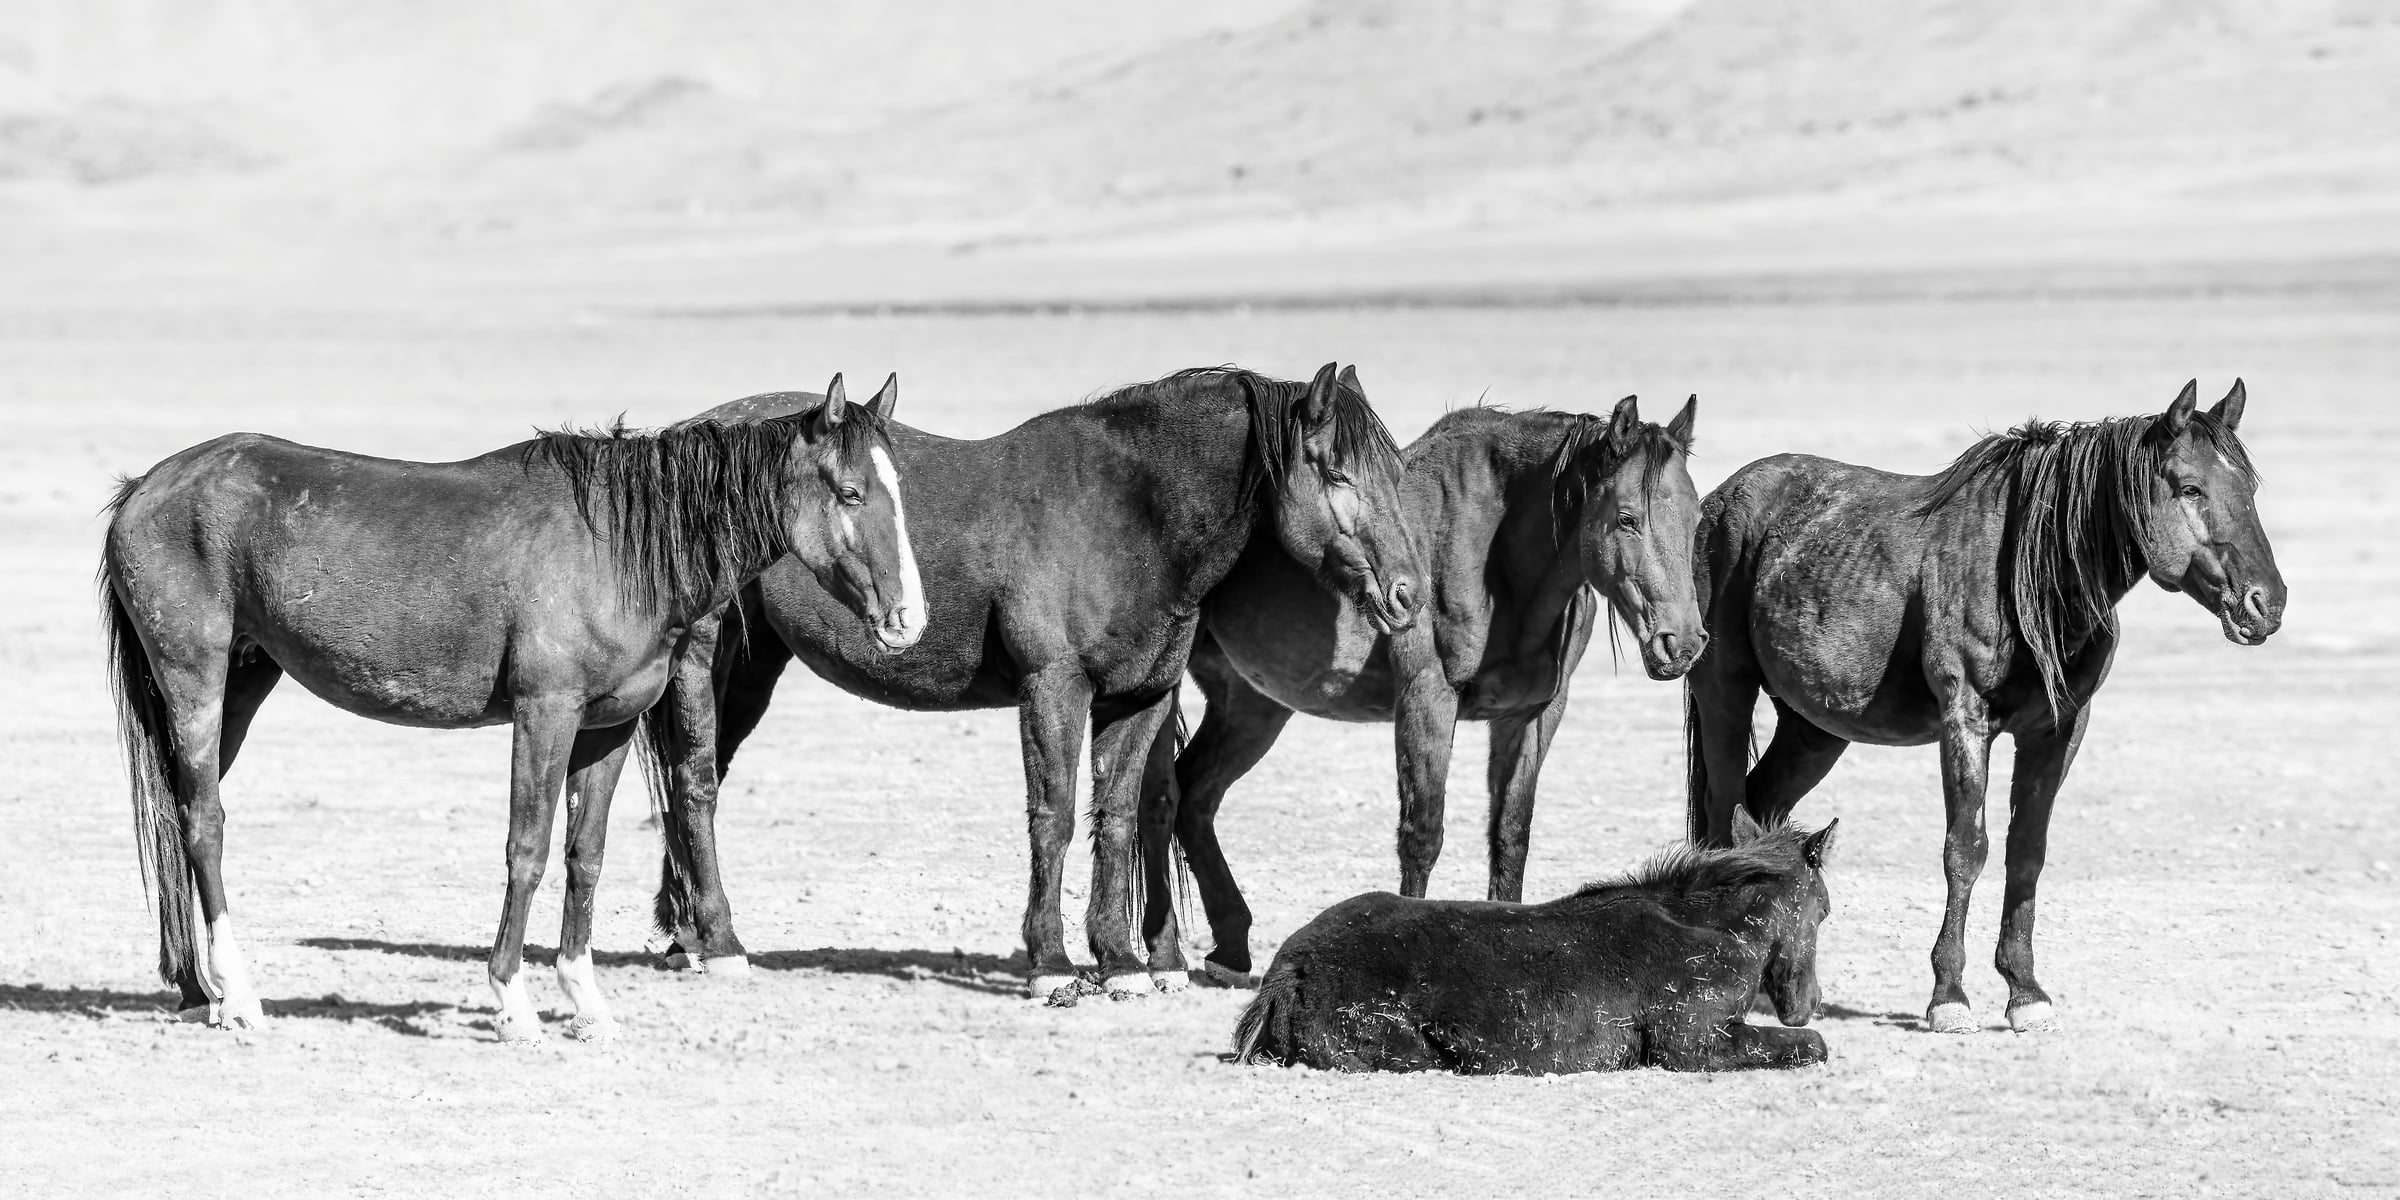 196 megapixels! A very high resolution, large-format VAST photo print of a group of horses standing in a desert; fine art photograph created by David David in Dugway Valley, Utah